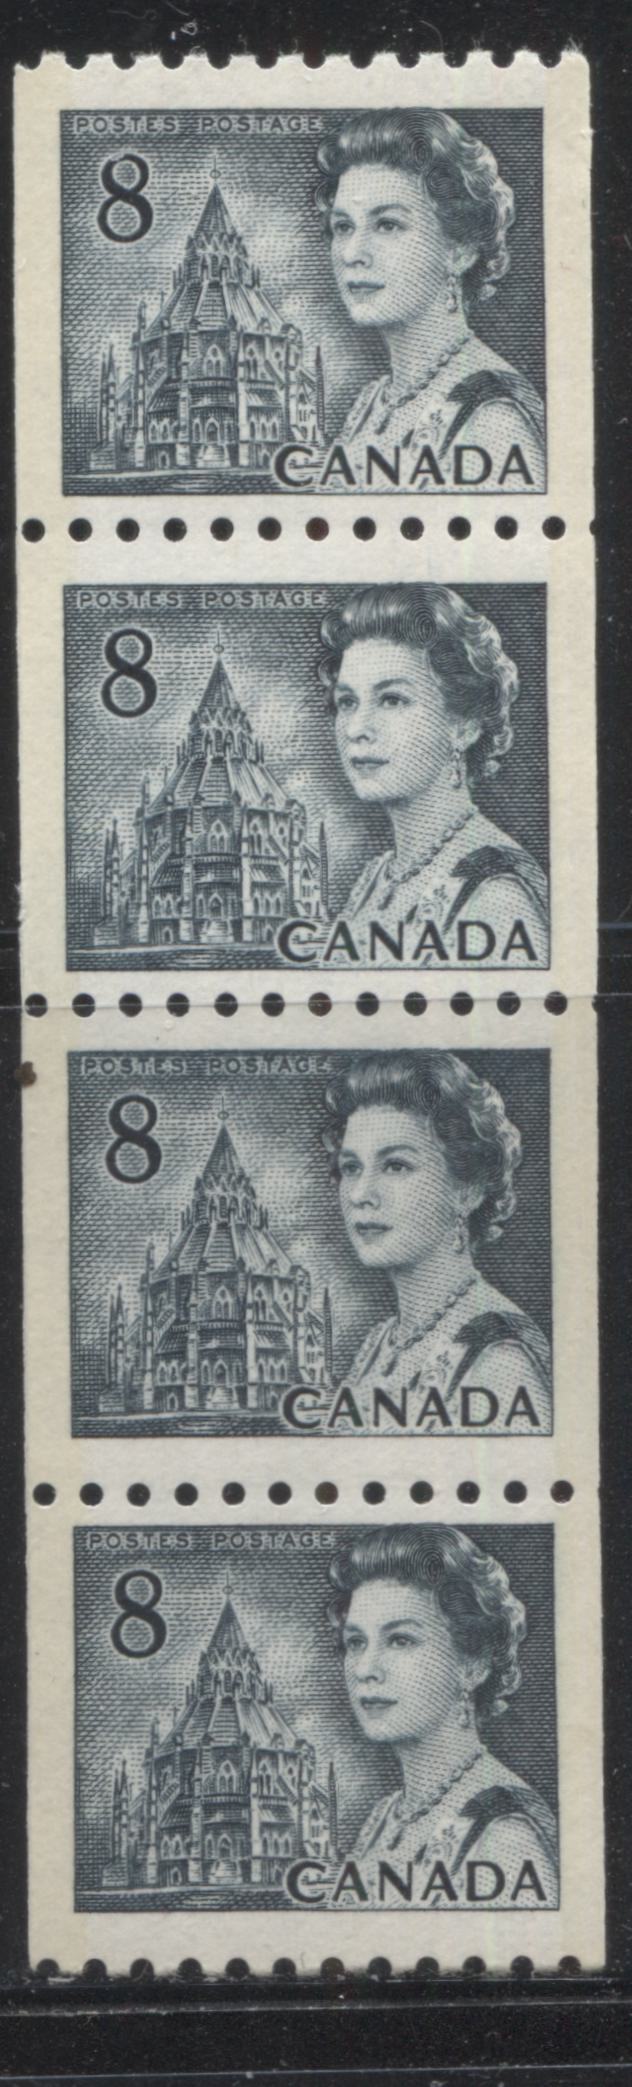 Lot 109 Canada #550pv 8c Slate Queen Elizabeth II, 1967-1973 Centennial Issue, A VFNH GT2 Tagged Coil Strip Of 4 On DF-fl Grayish Vertical Wove Paper With Very Few LF Fibers, With Eggshell PVA Gum And 3.5mm Narrow Spacing Coil Strip